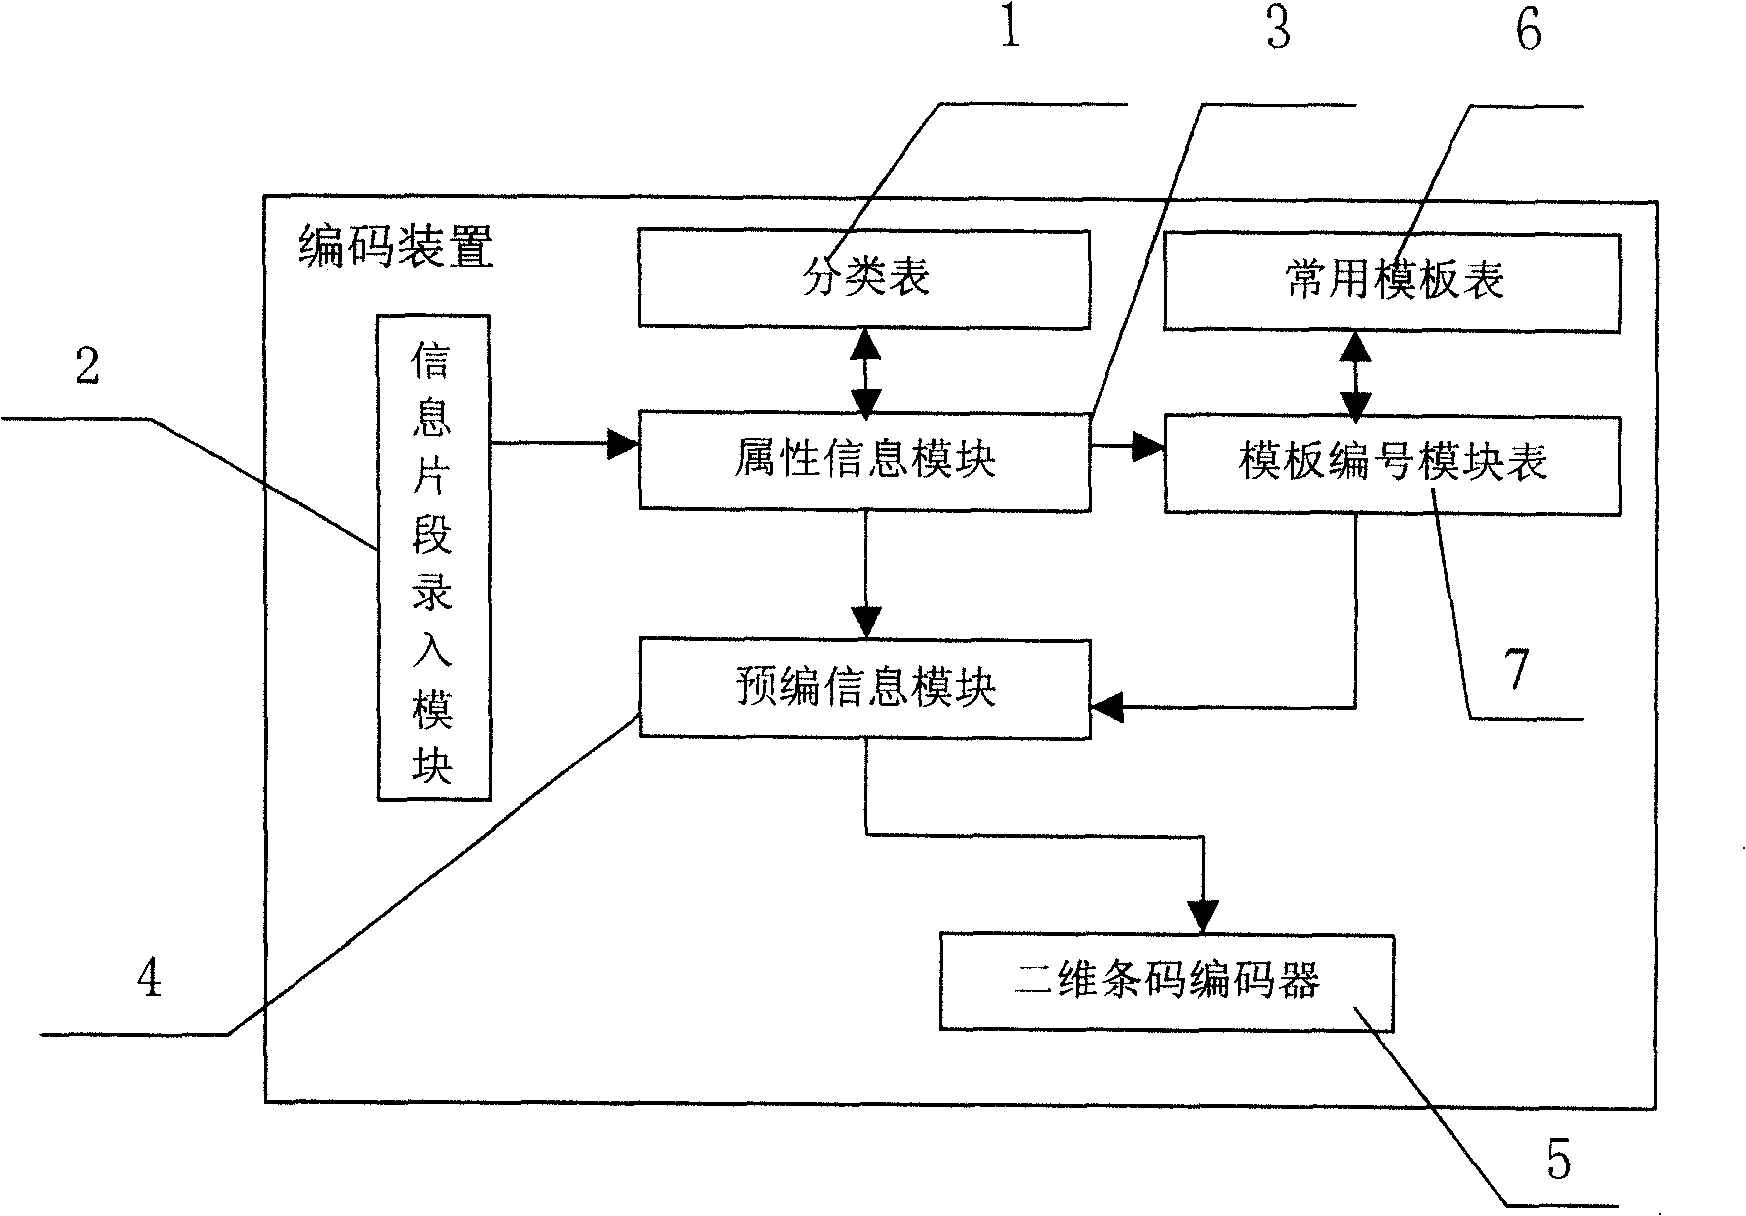 Two-dimensional bar code based information transfer method and encoding/decoding device